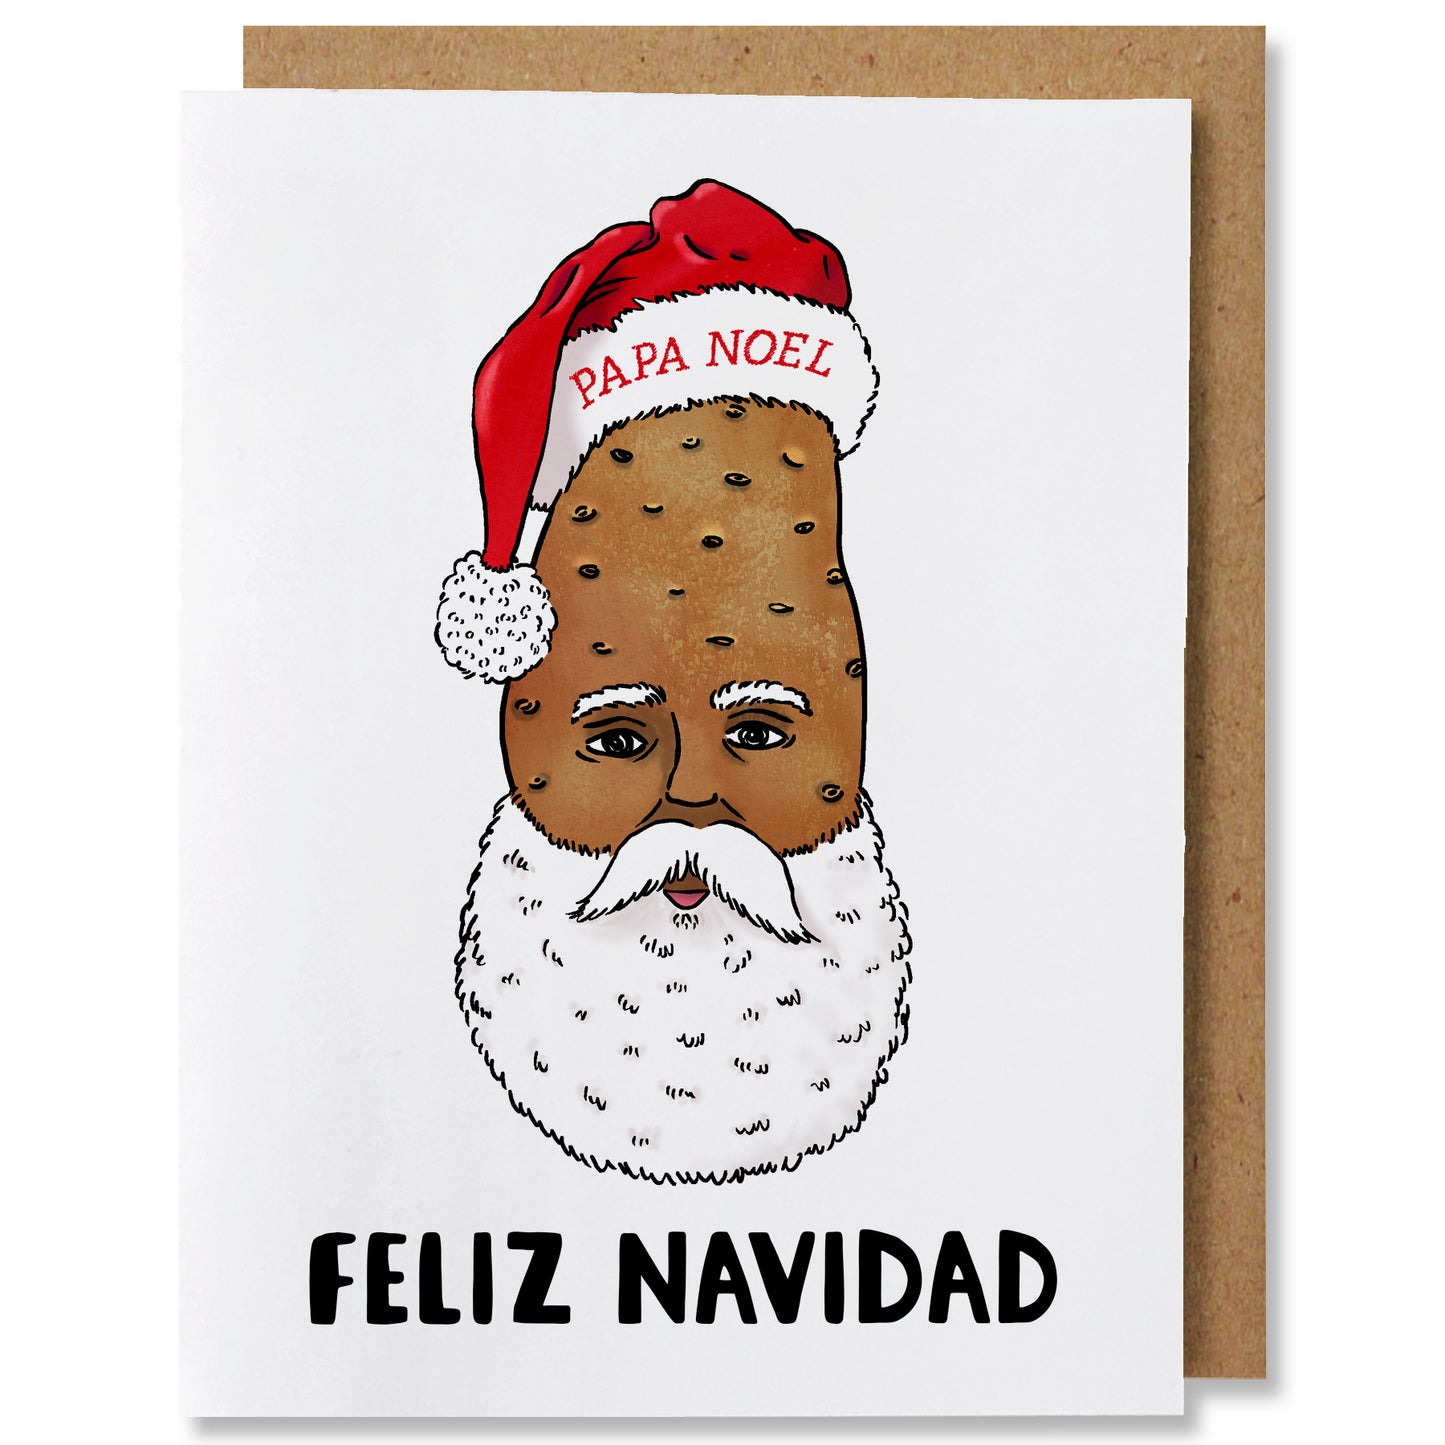 An illustrated holiday card featuring a santa clause in the centre with the words 'Papa Noel' displayed in red on the white rim of the hat with the phrase 'Feliz Navidad' on the bottom